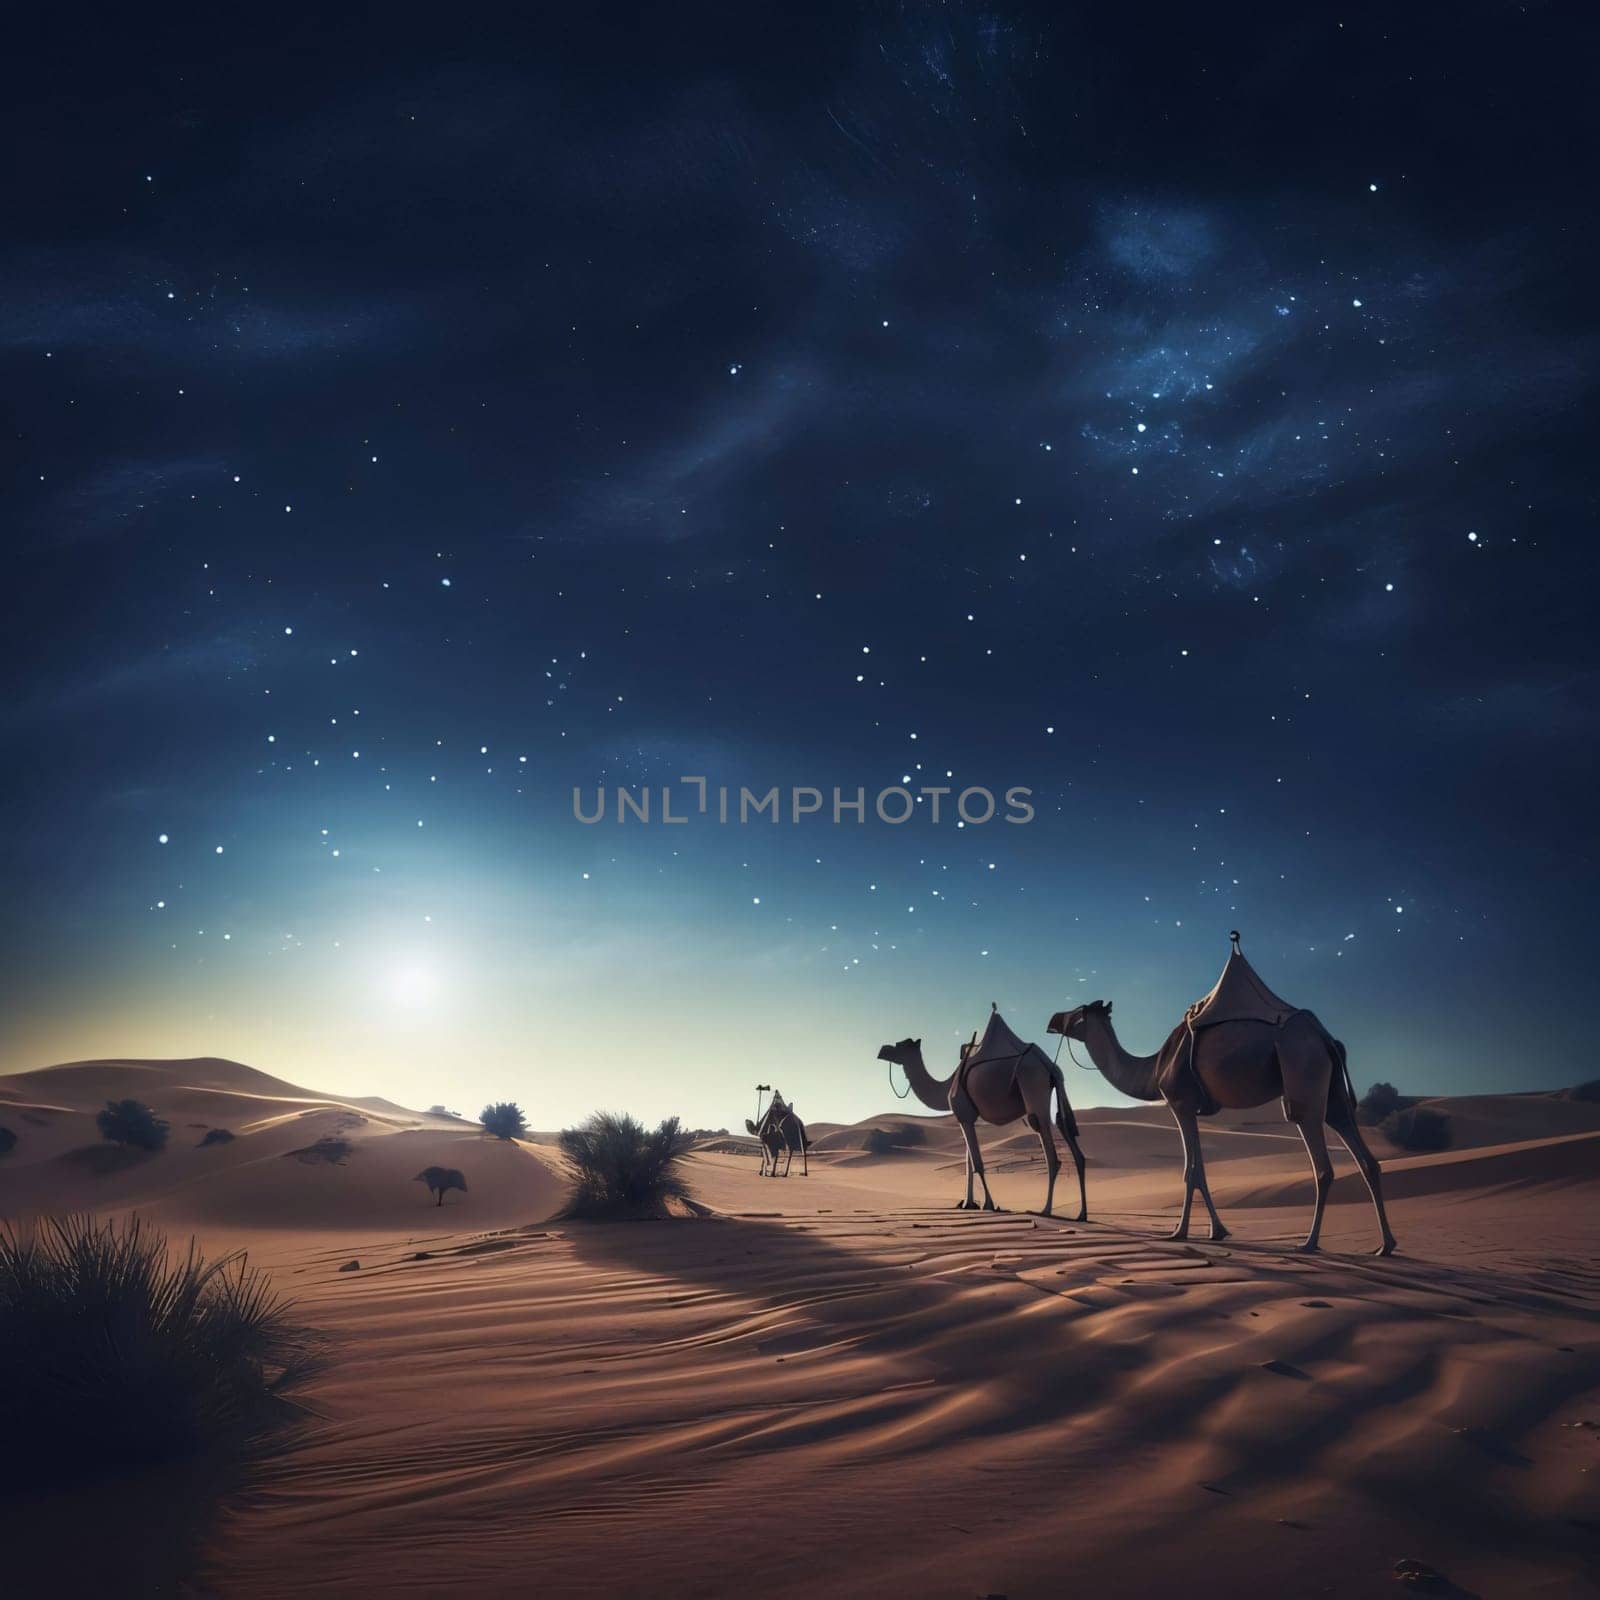 Camels traveling through deserts at sunset all around sand dark sky. Ramadan as a time of fasting and prayer for Muslims. A time to meet with Allah.